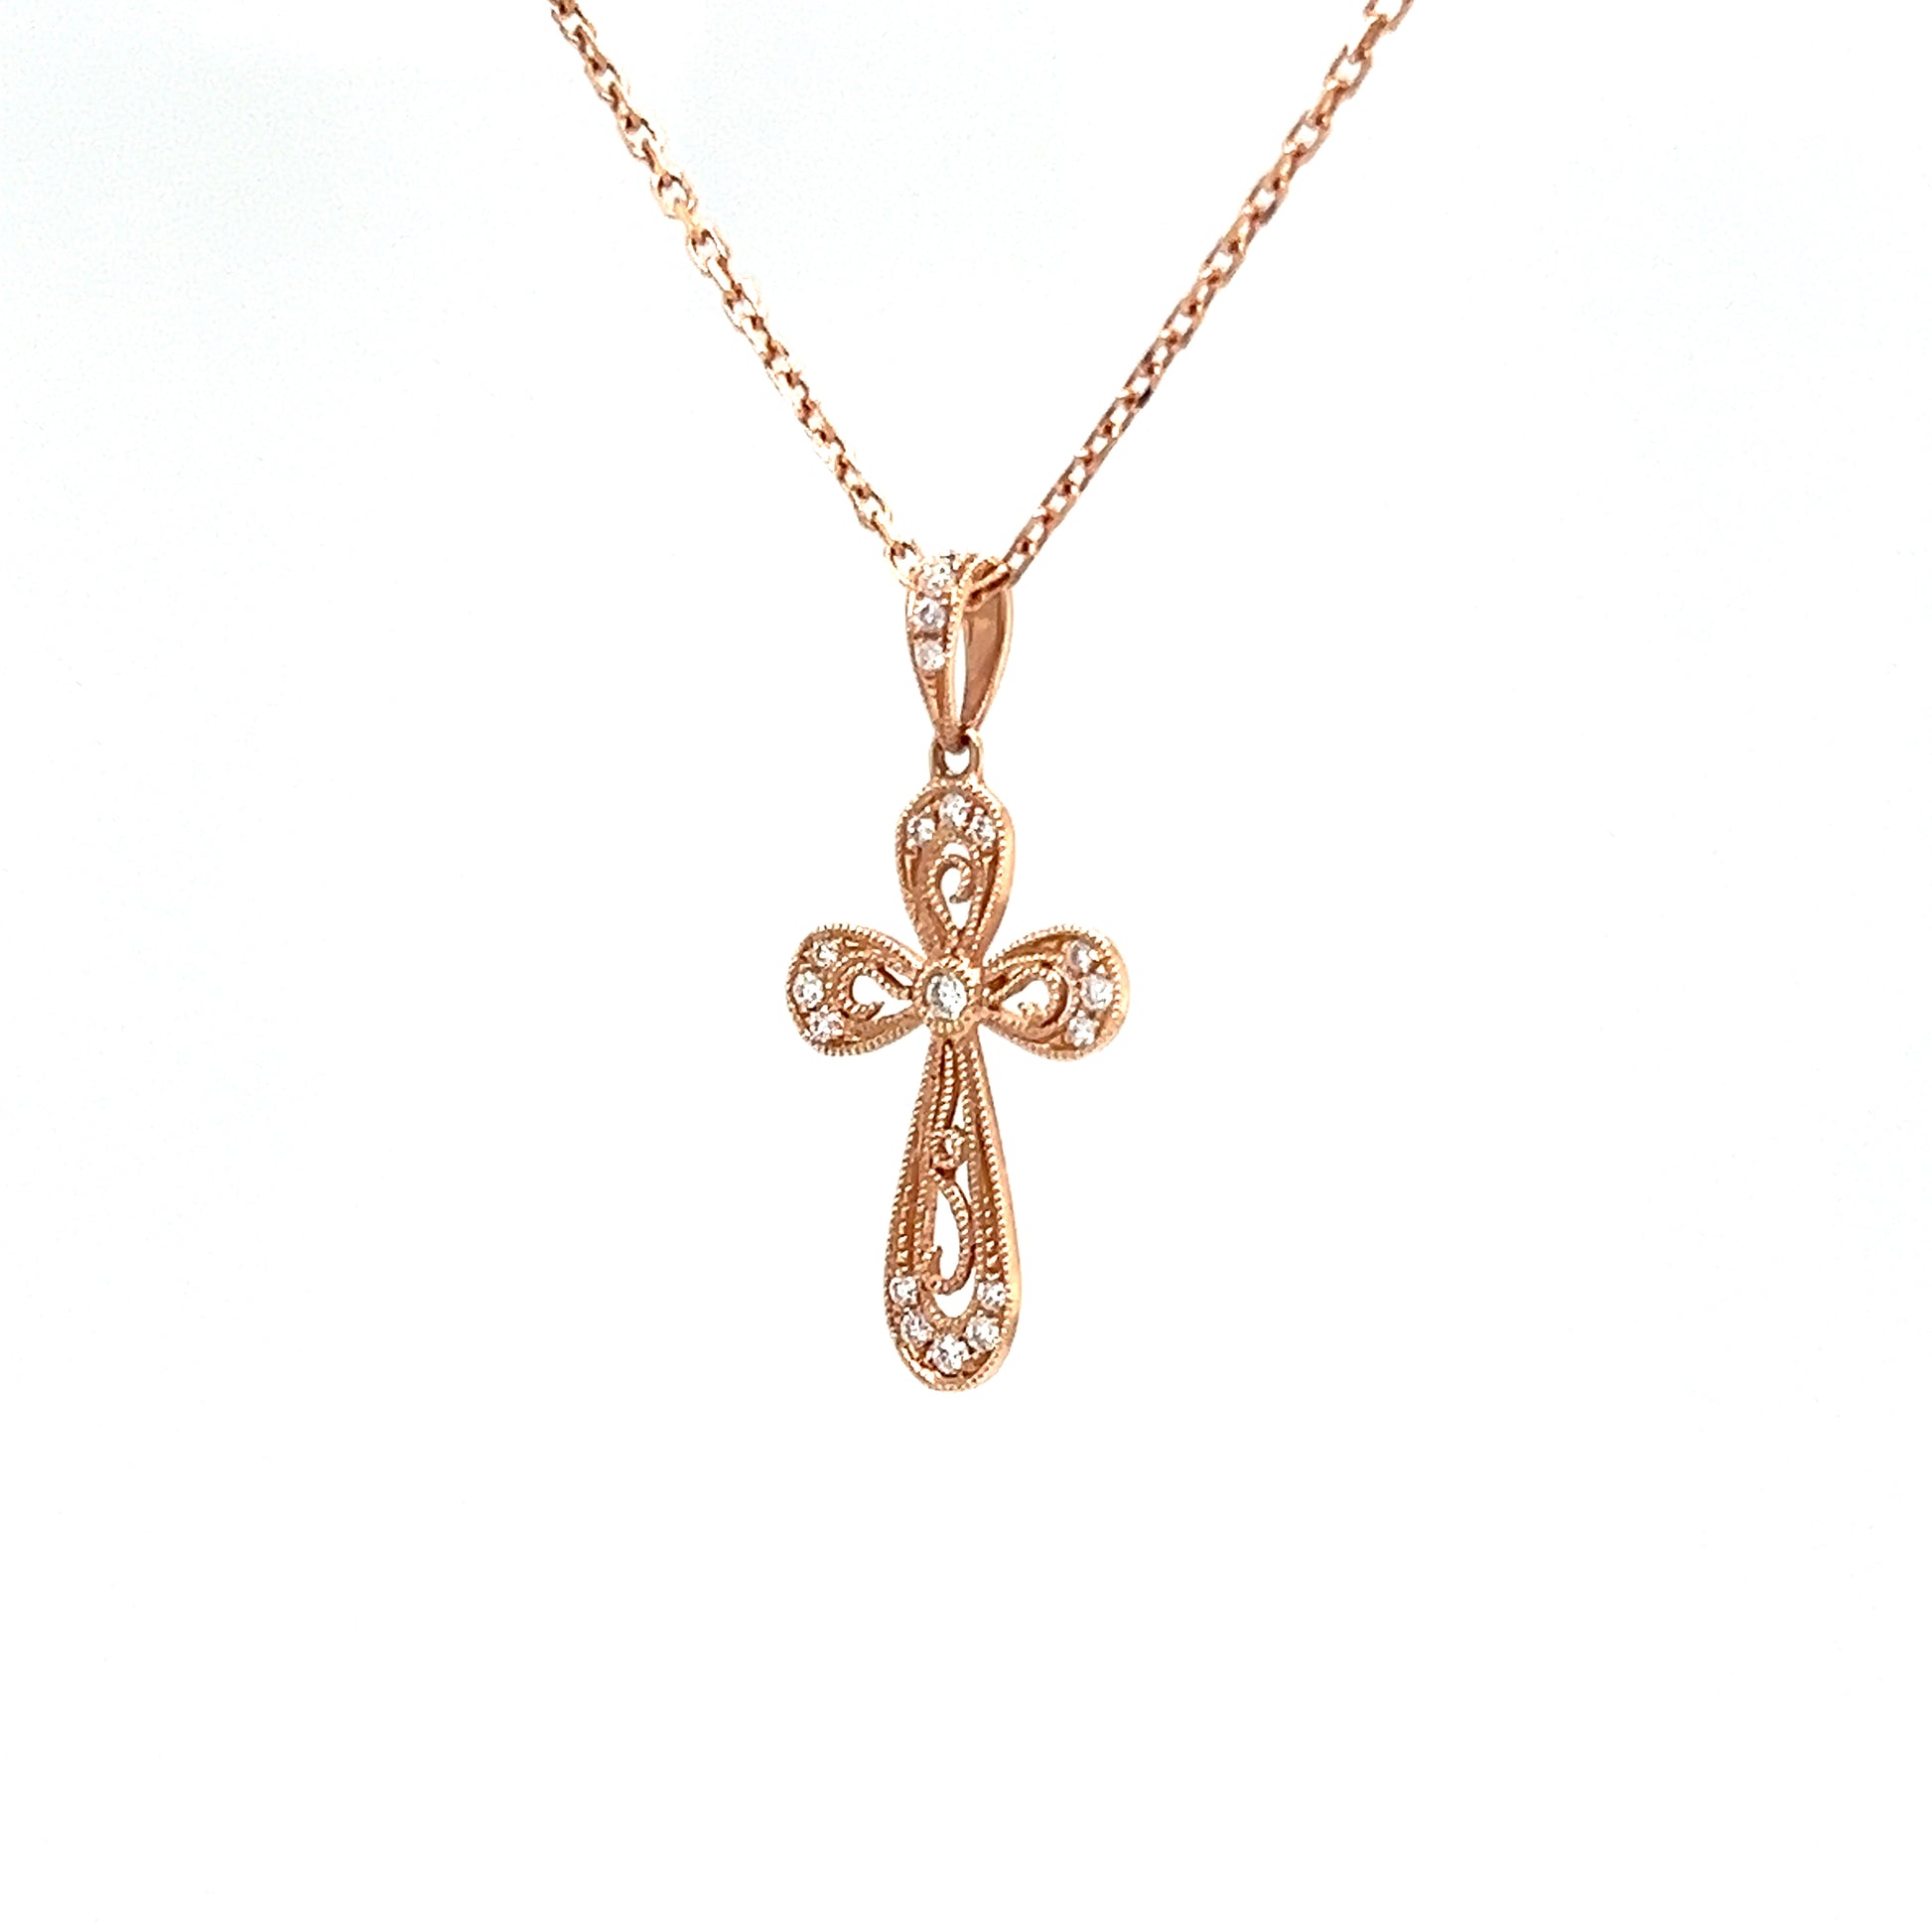 Diamond Cross Pendant with Milgrain Details in 14K Rose Gold Right Side View